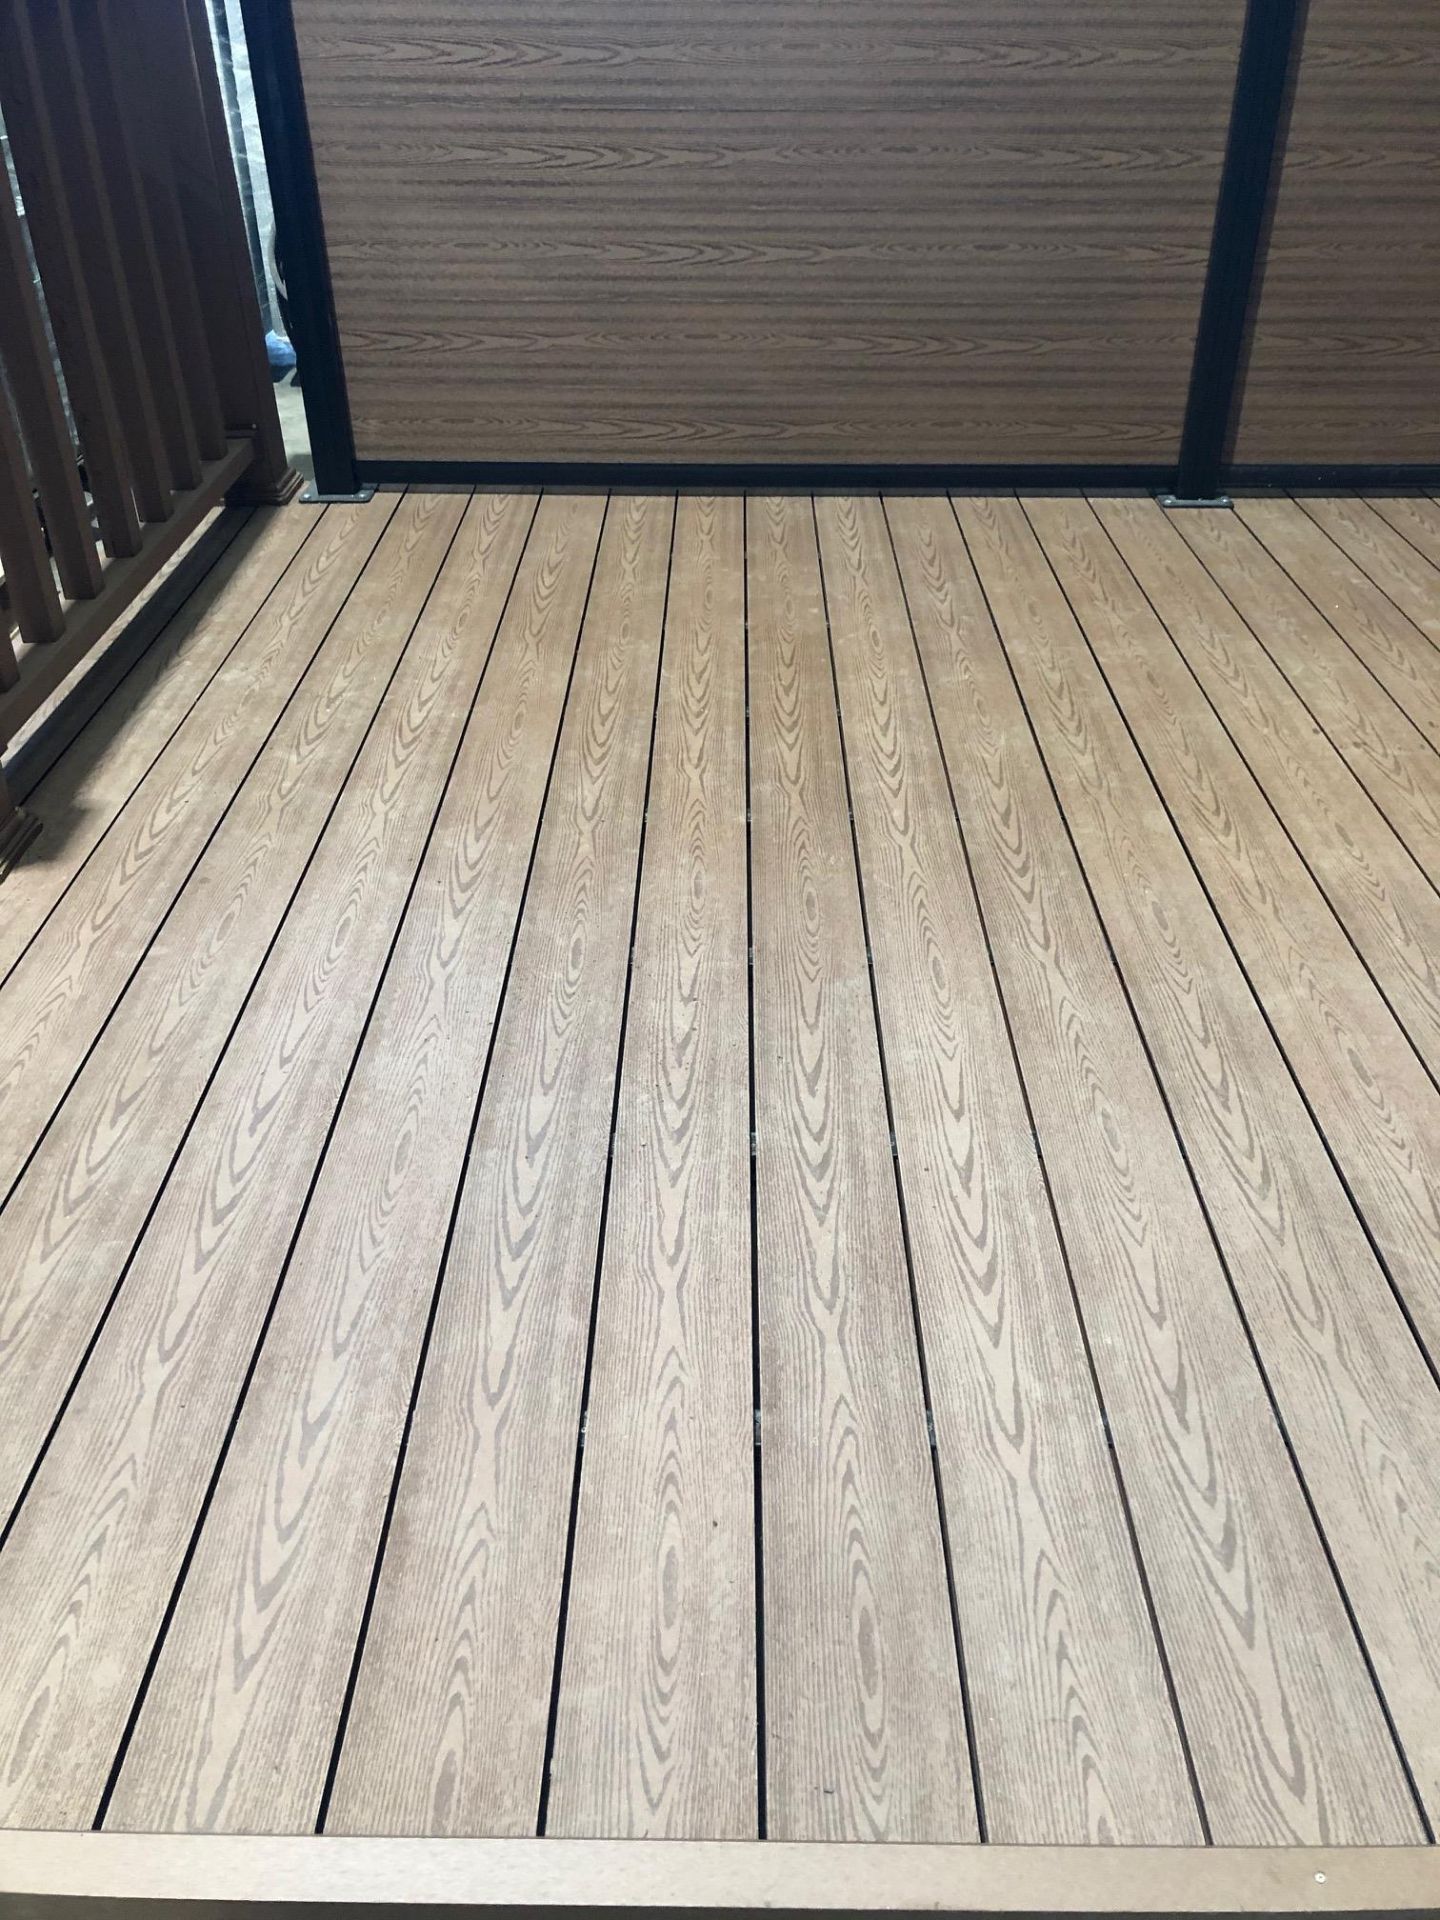 * Complete Light Grey WPC decking Kit 2.9m x 2.9m includes joists - clips - decking - screws & fixin - Image 3 of 9